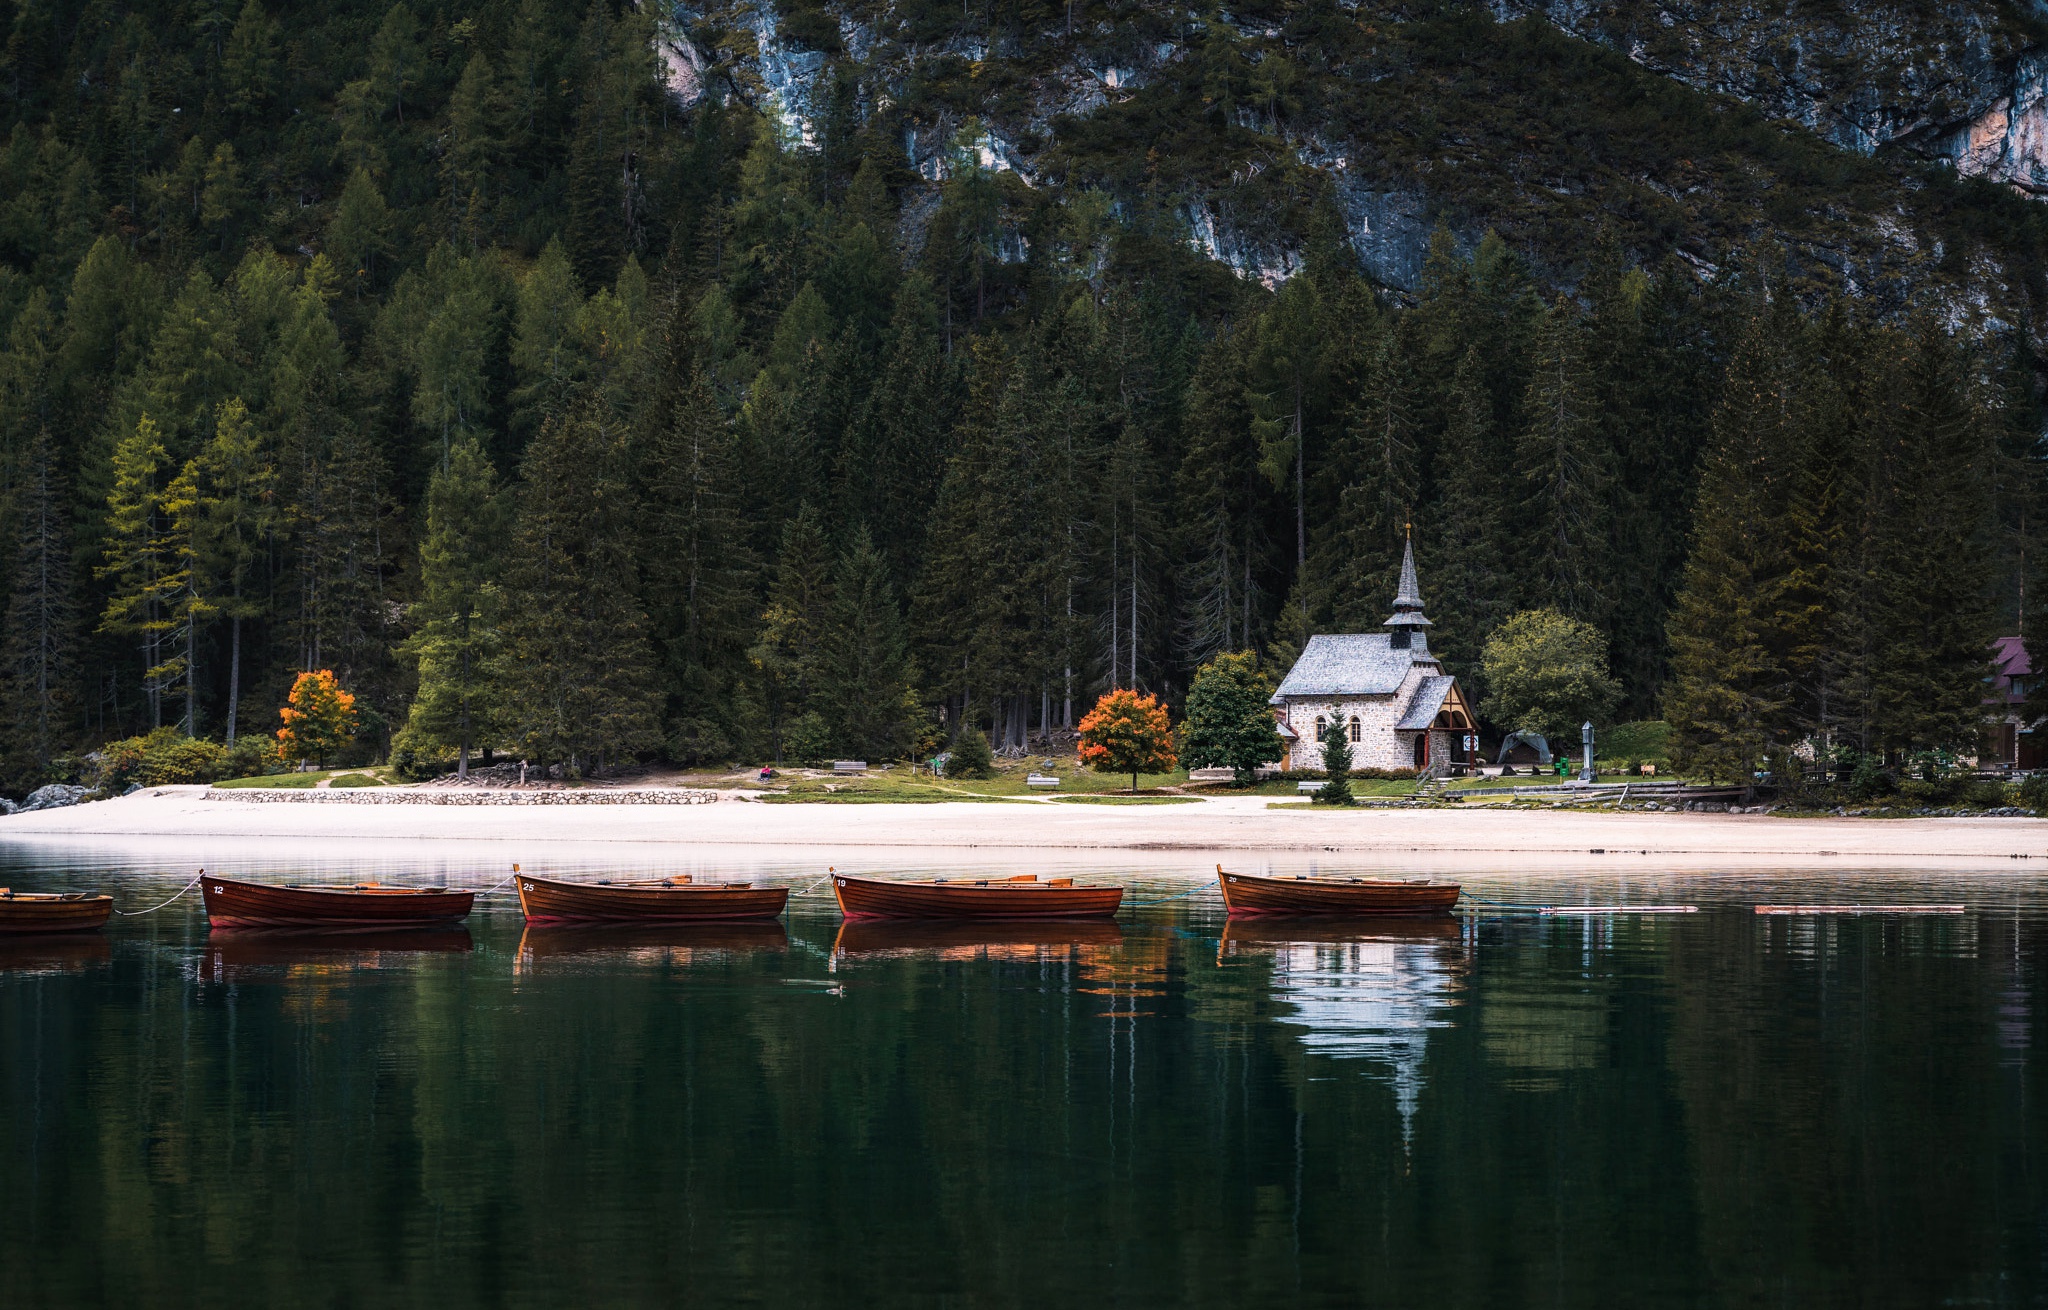 General 2048x1310 Alessandro laurito lake trees Pragser Wildsee church landscape boat beach